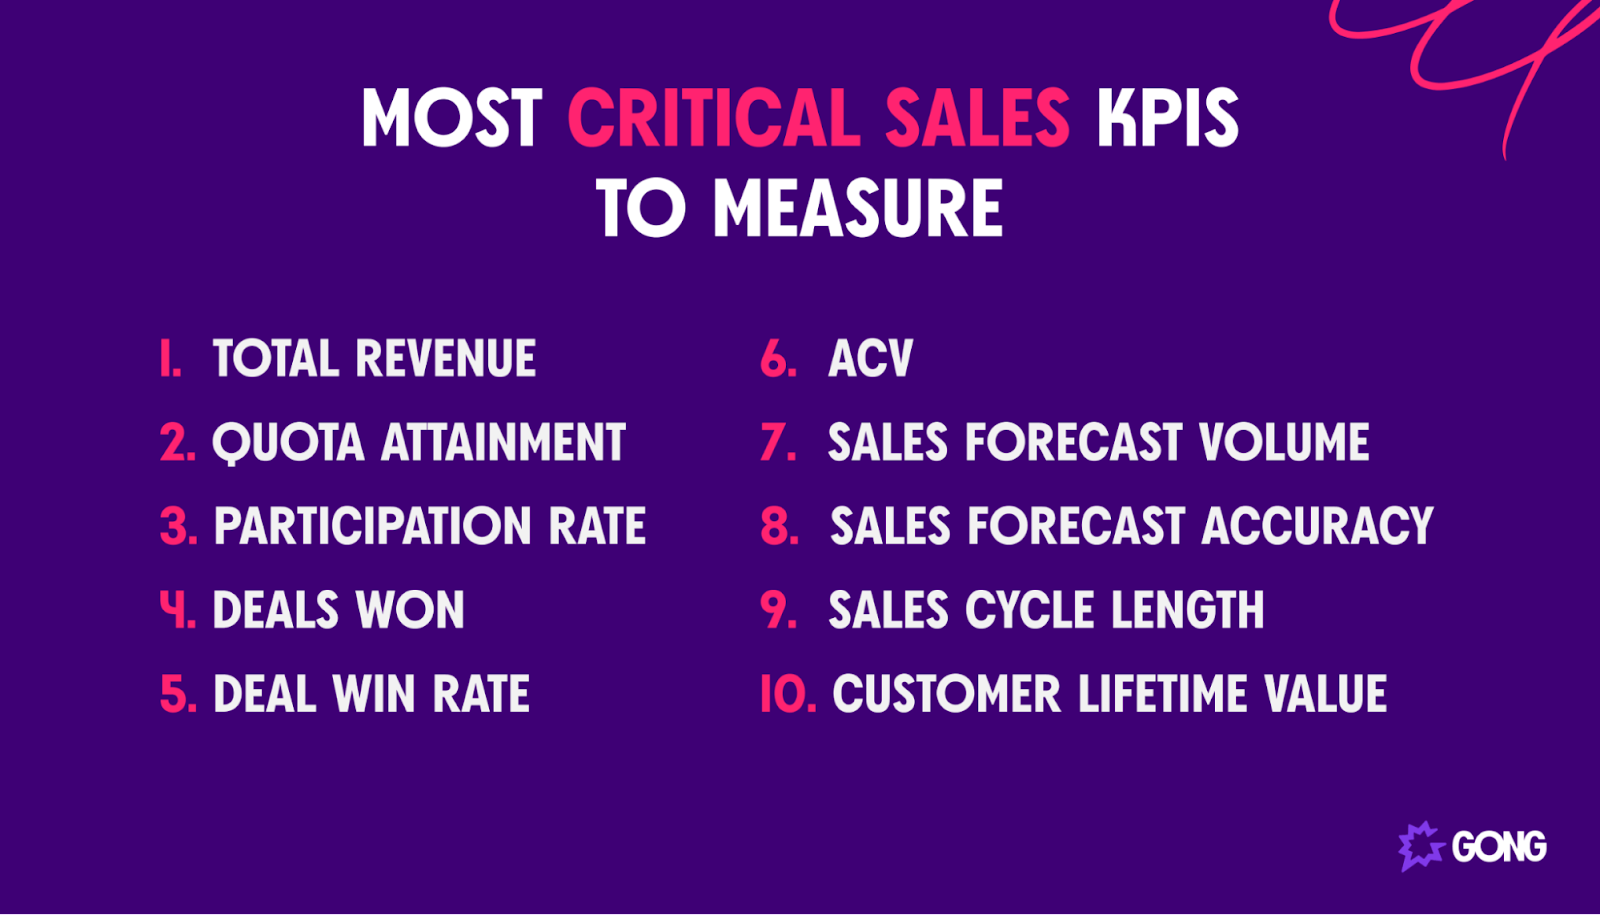 The most critical sales KPIs to measure